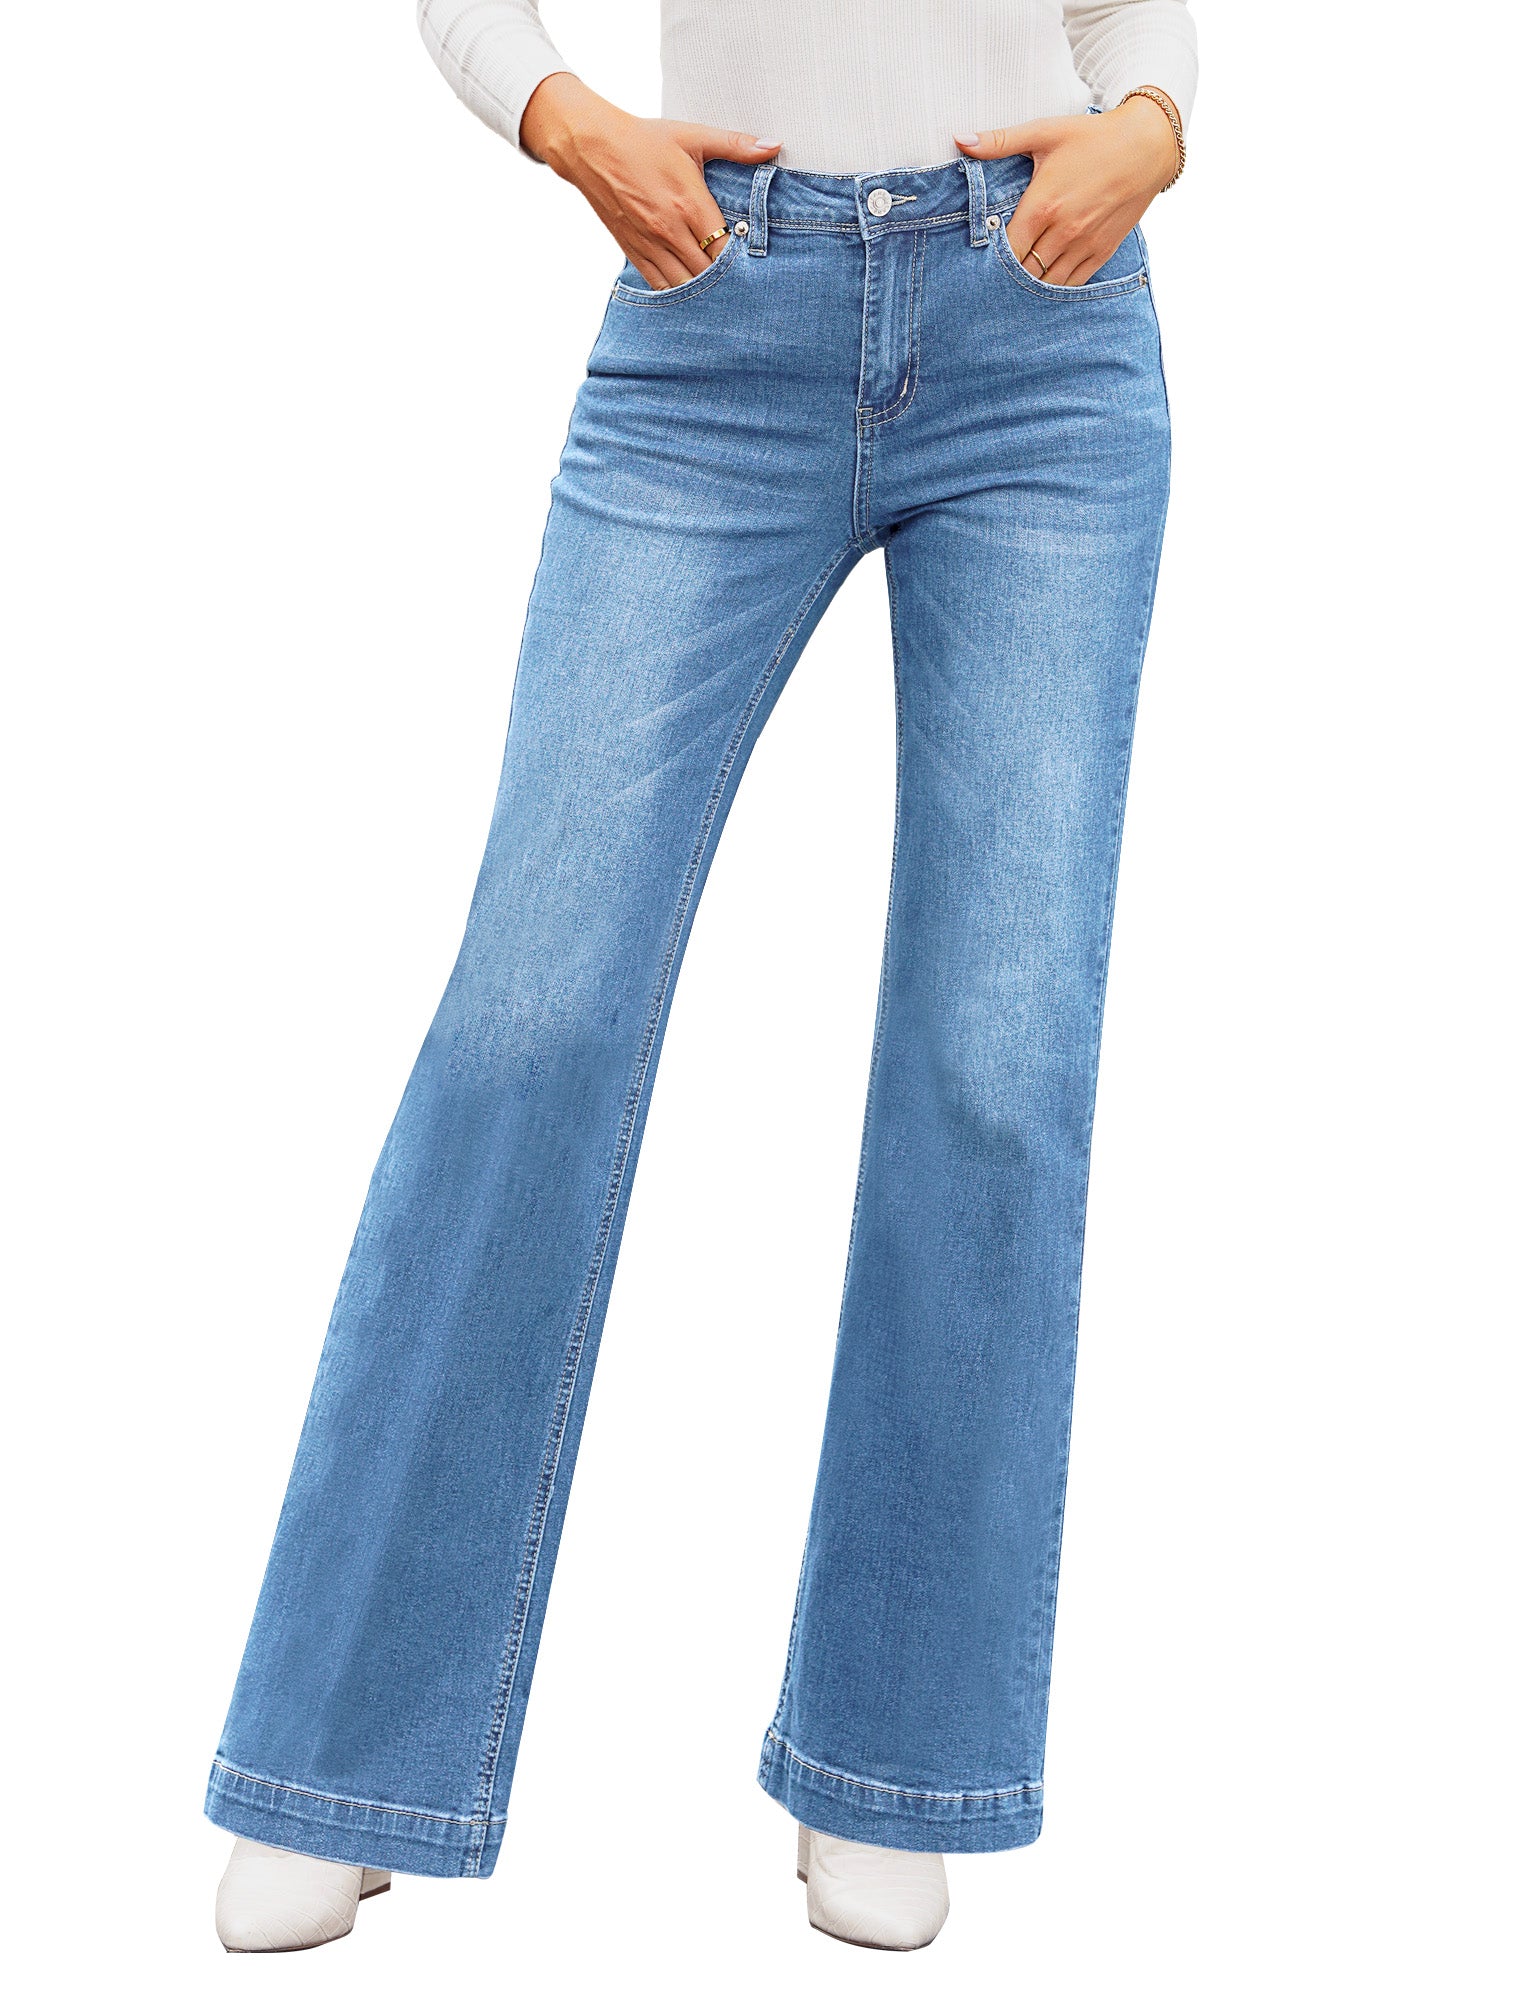 Top more than 115 high waisted denim jeans womens latest